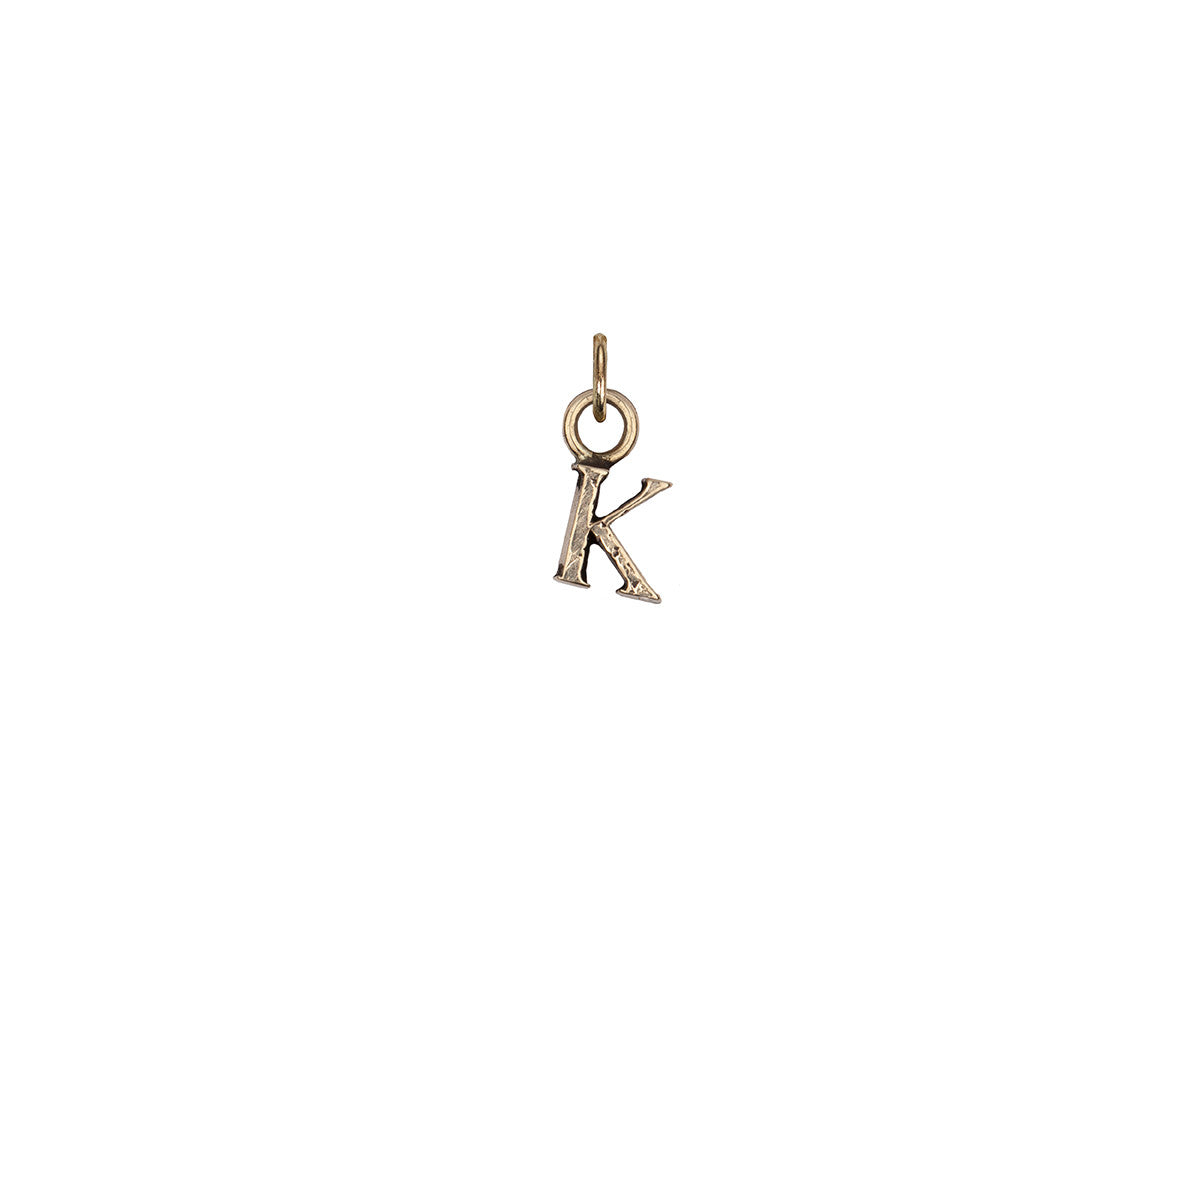 A 14k gold charm in the shape of the letter "K".